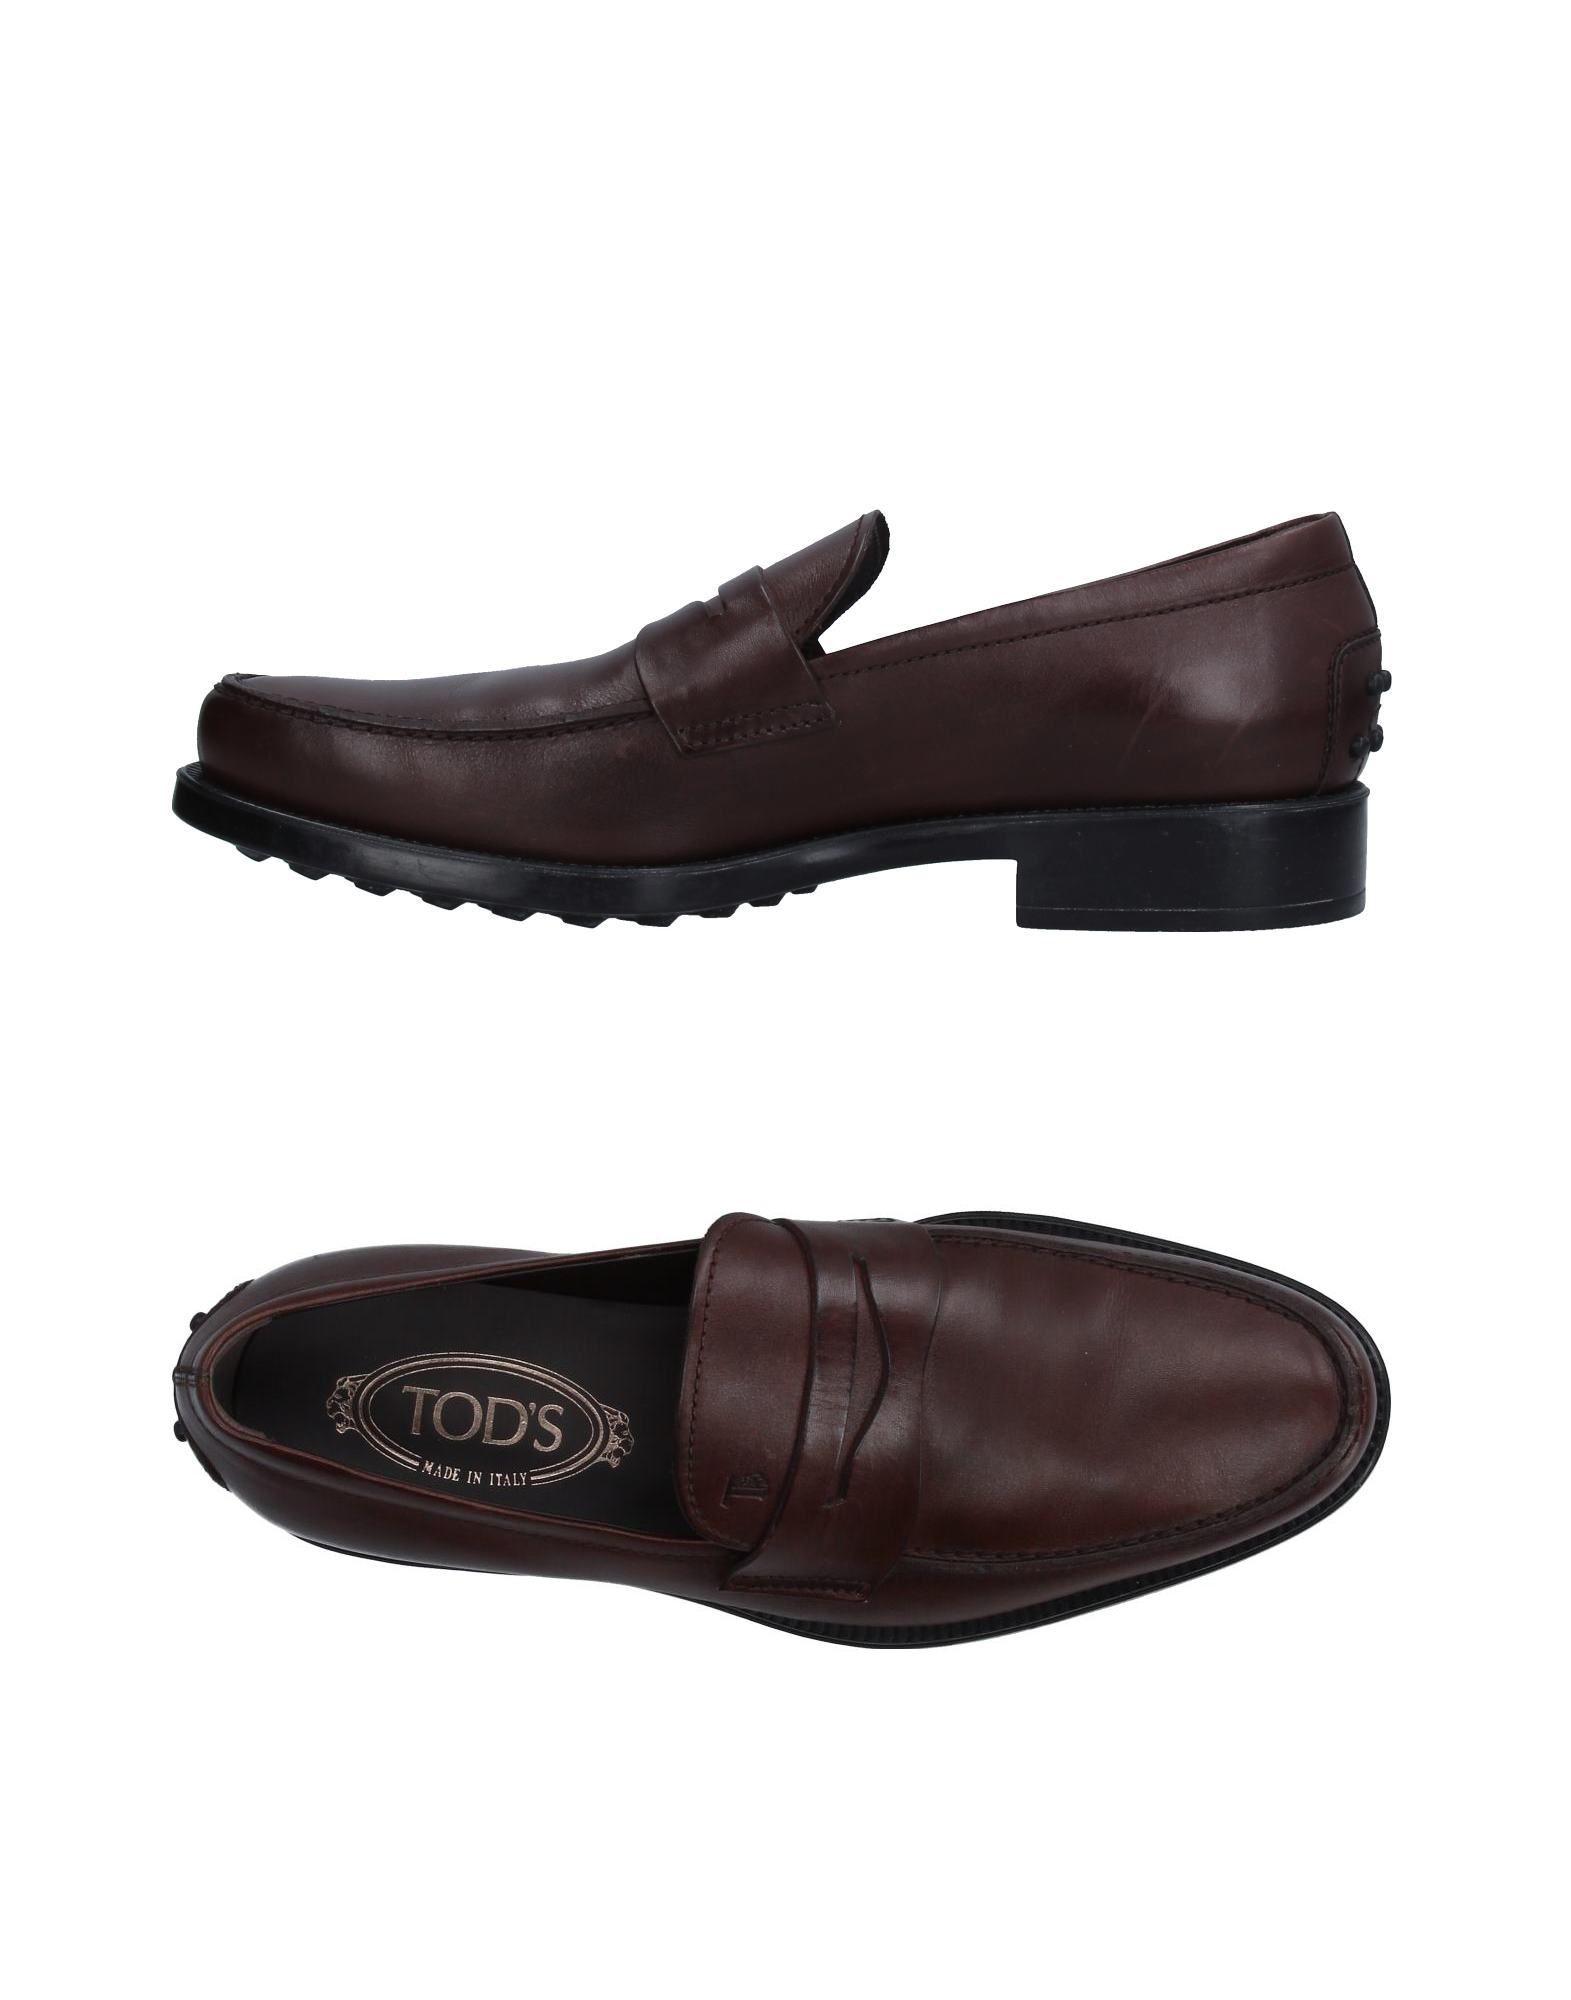 Lyst - Tod's Loafer in Brown for Men - Save 64%